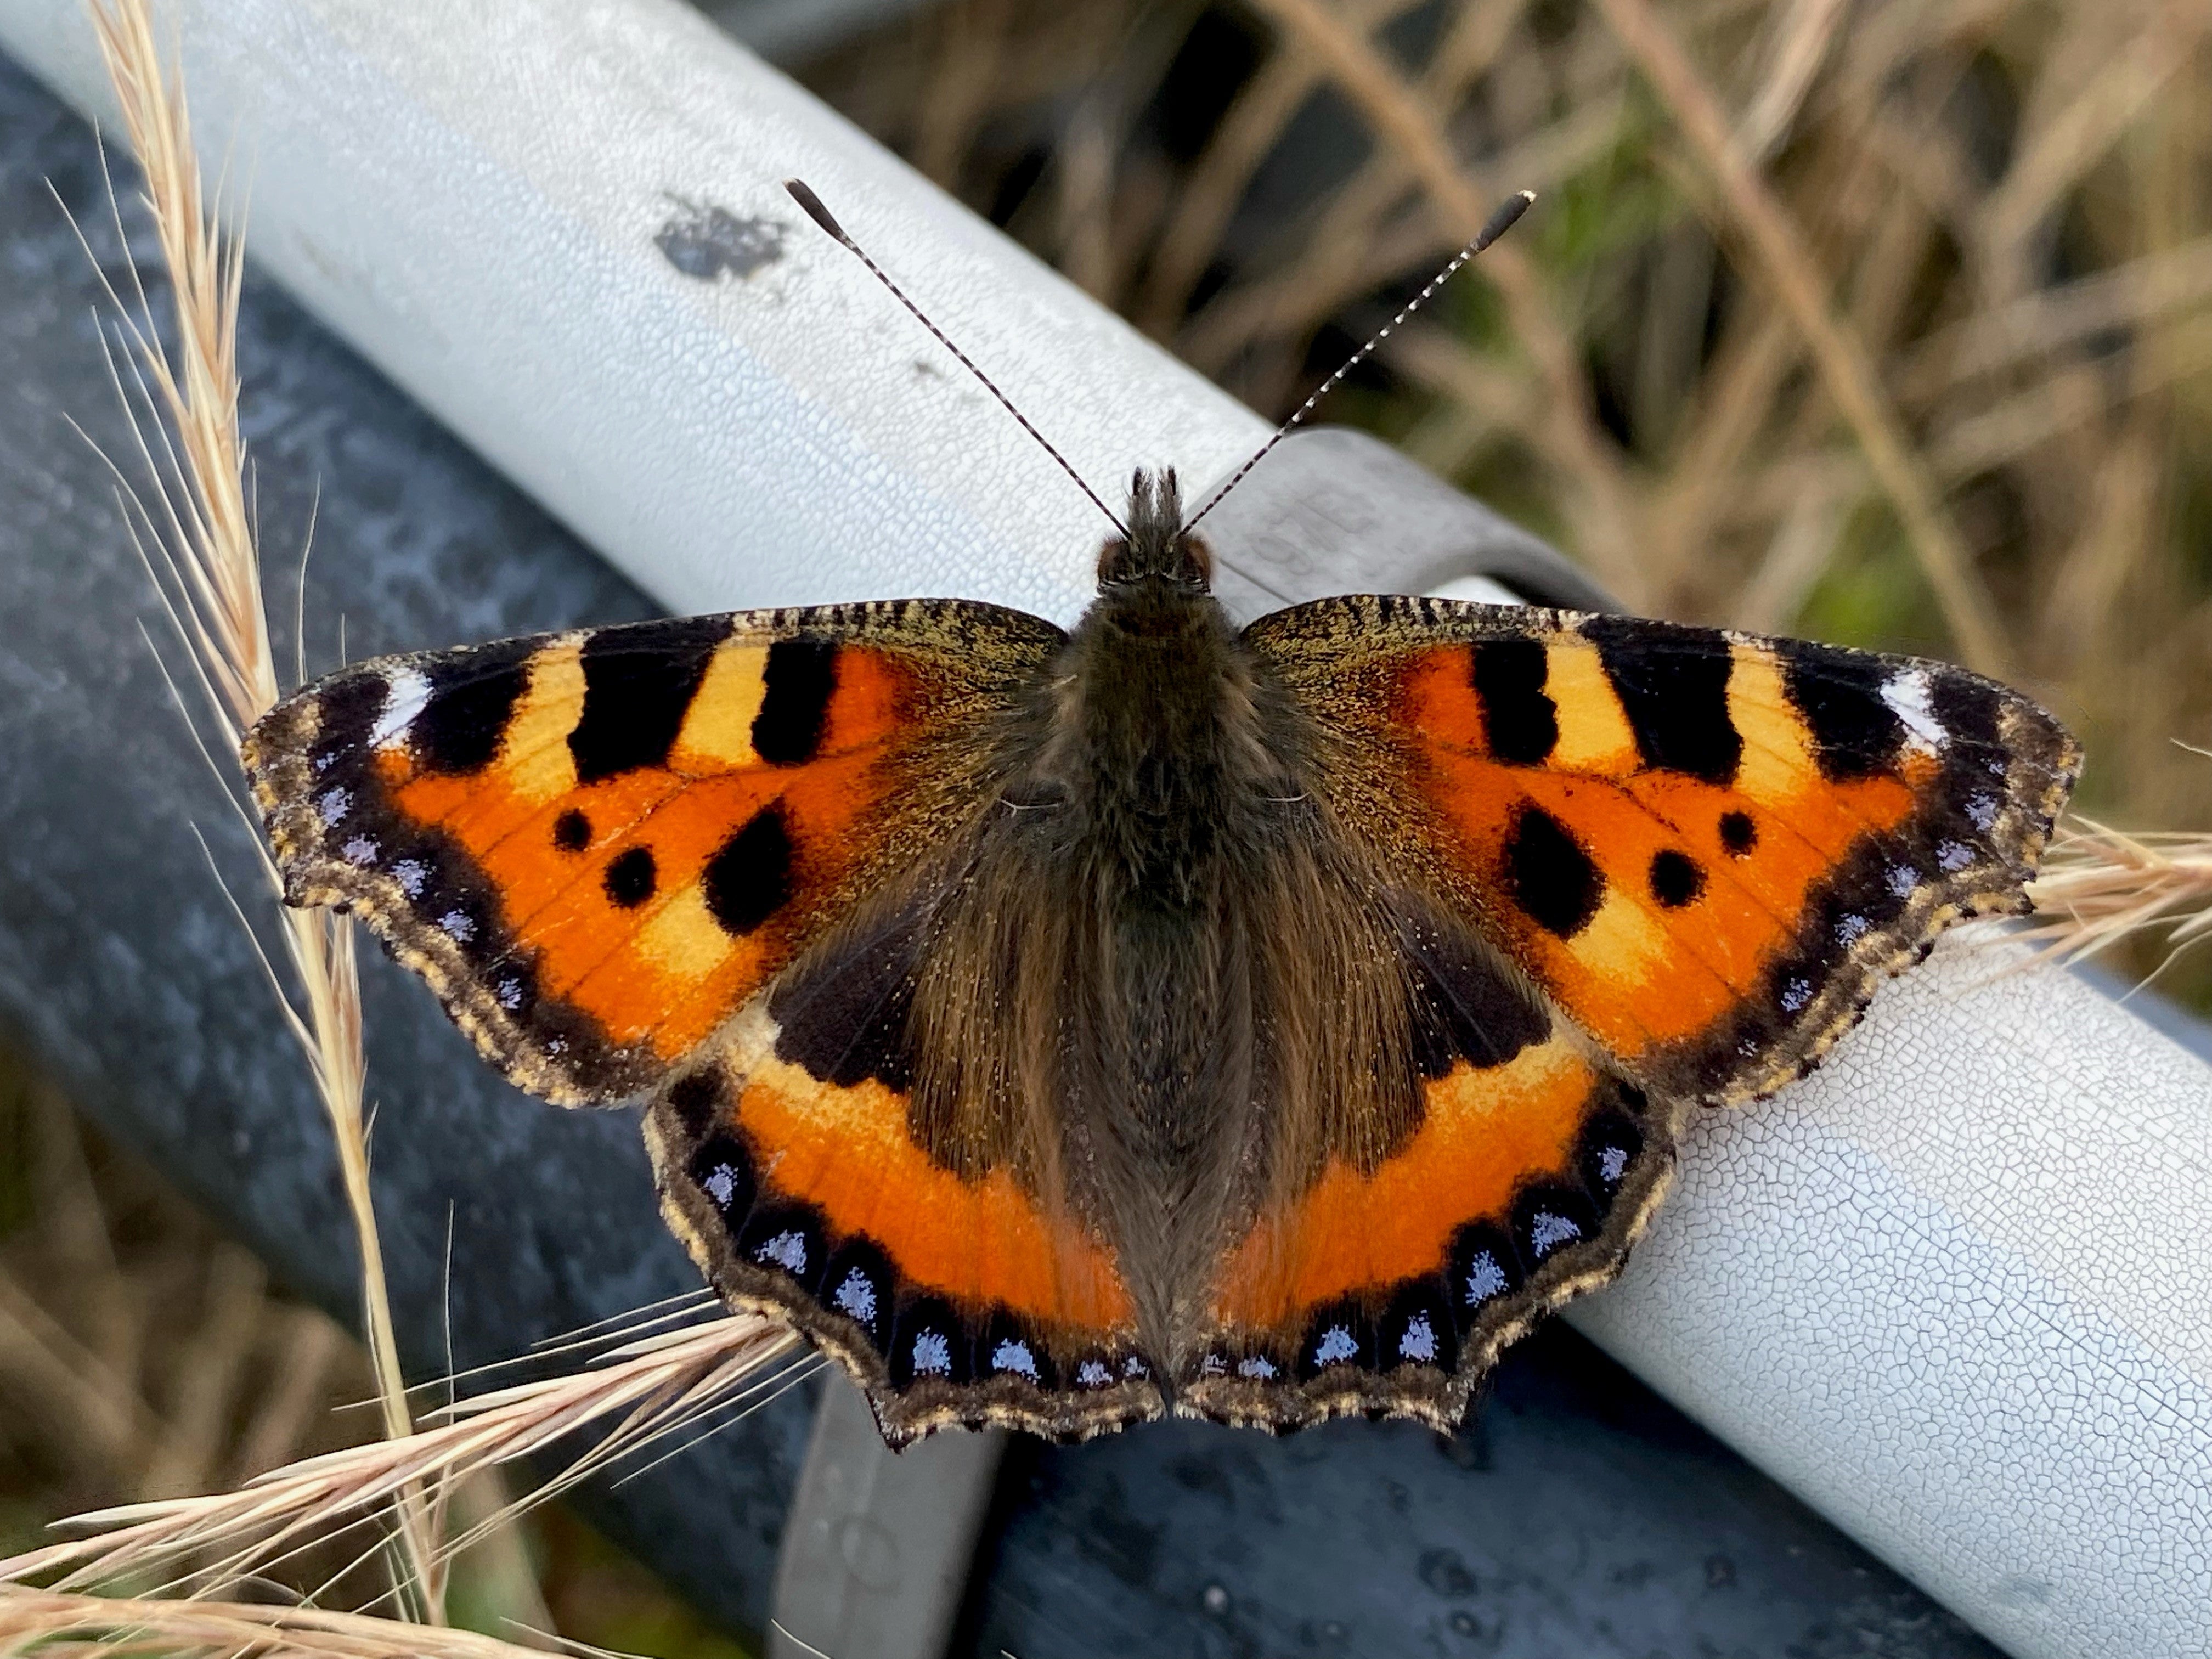 Tortoiseshell butterflies are one of many insects found on Nomura’s green roof